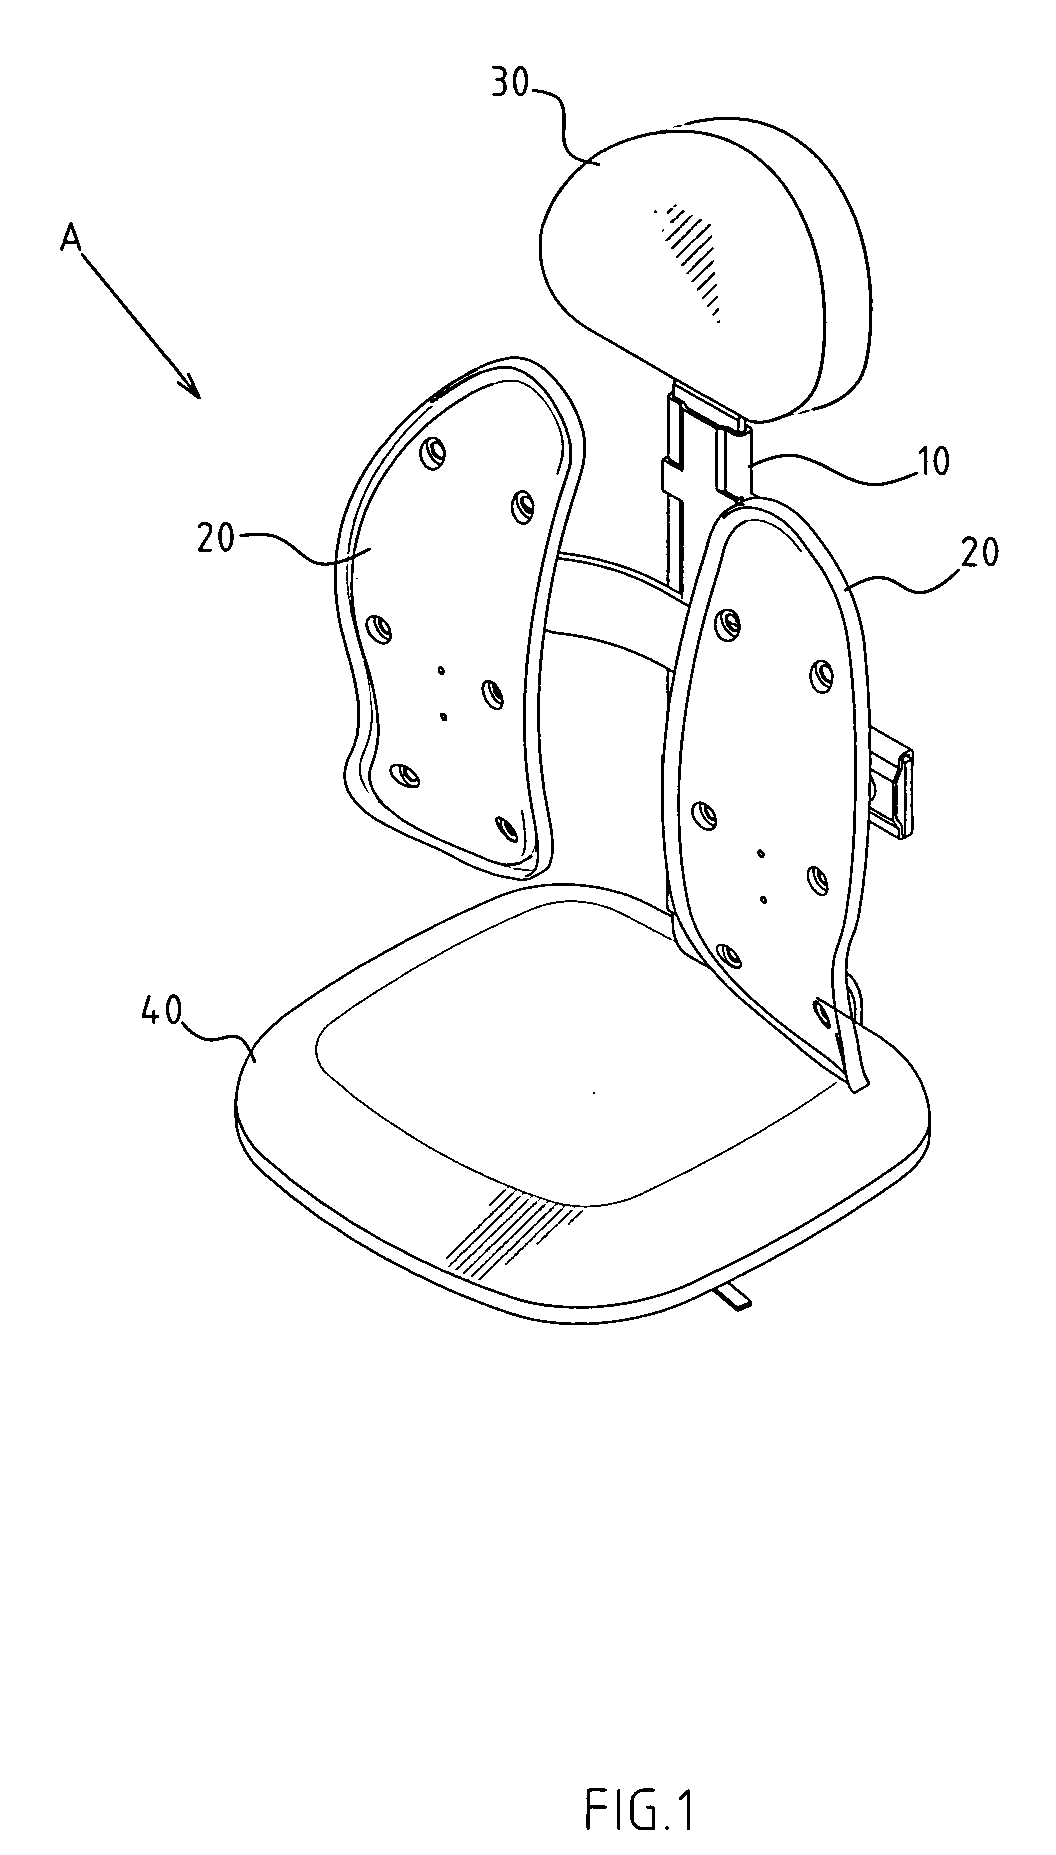 Adjustment structure of chair backrests